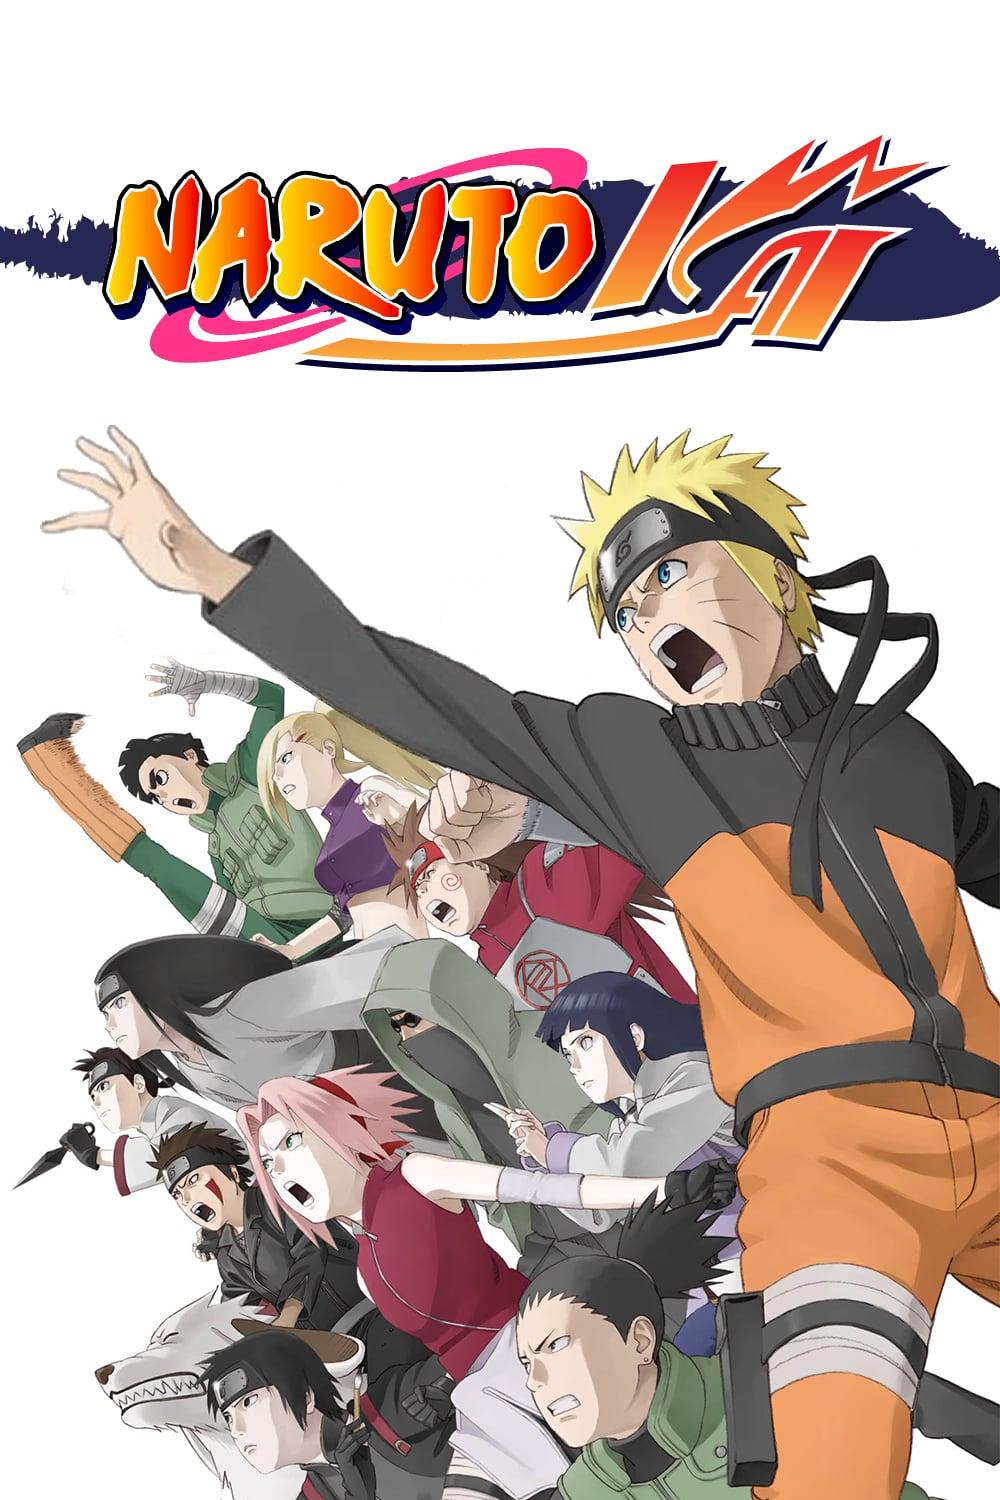 1000 x 1500 · jpeg - Naruto TV Show Poster - ID: 382382 - Image Abyss